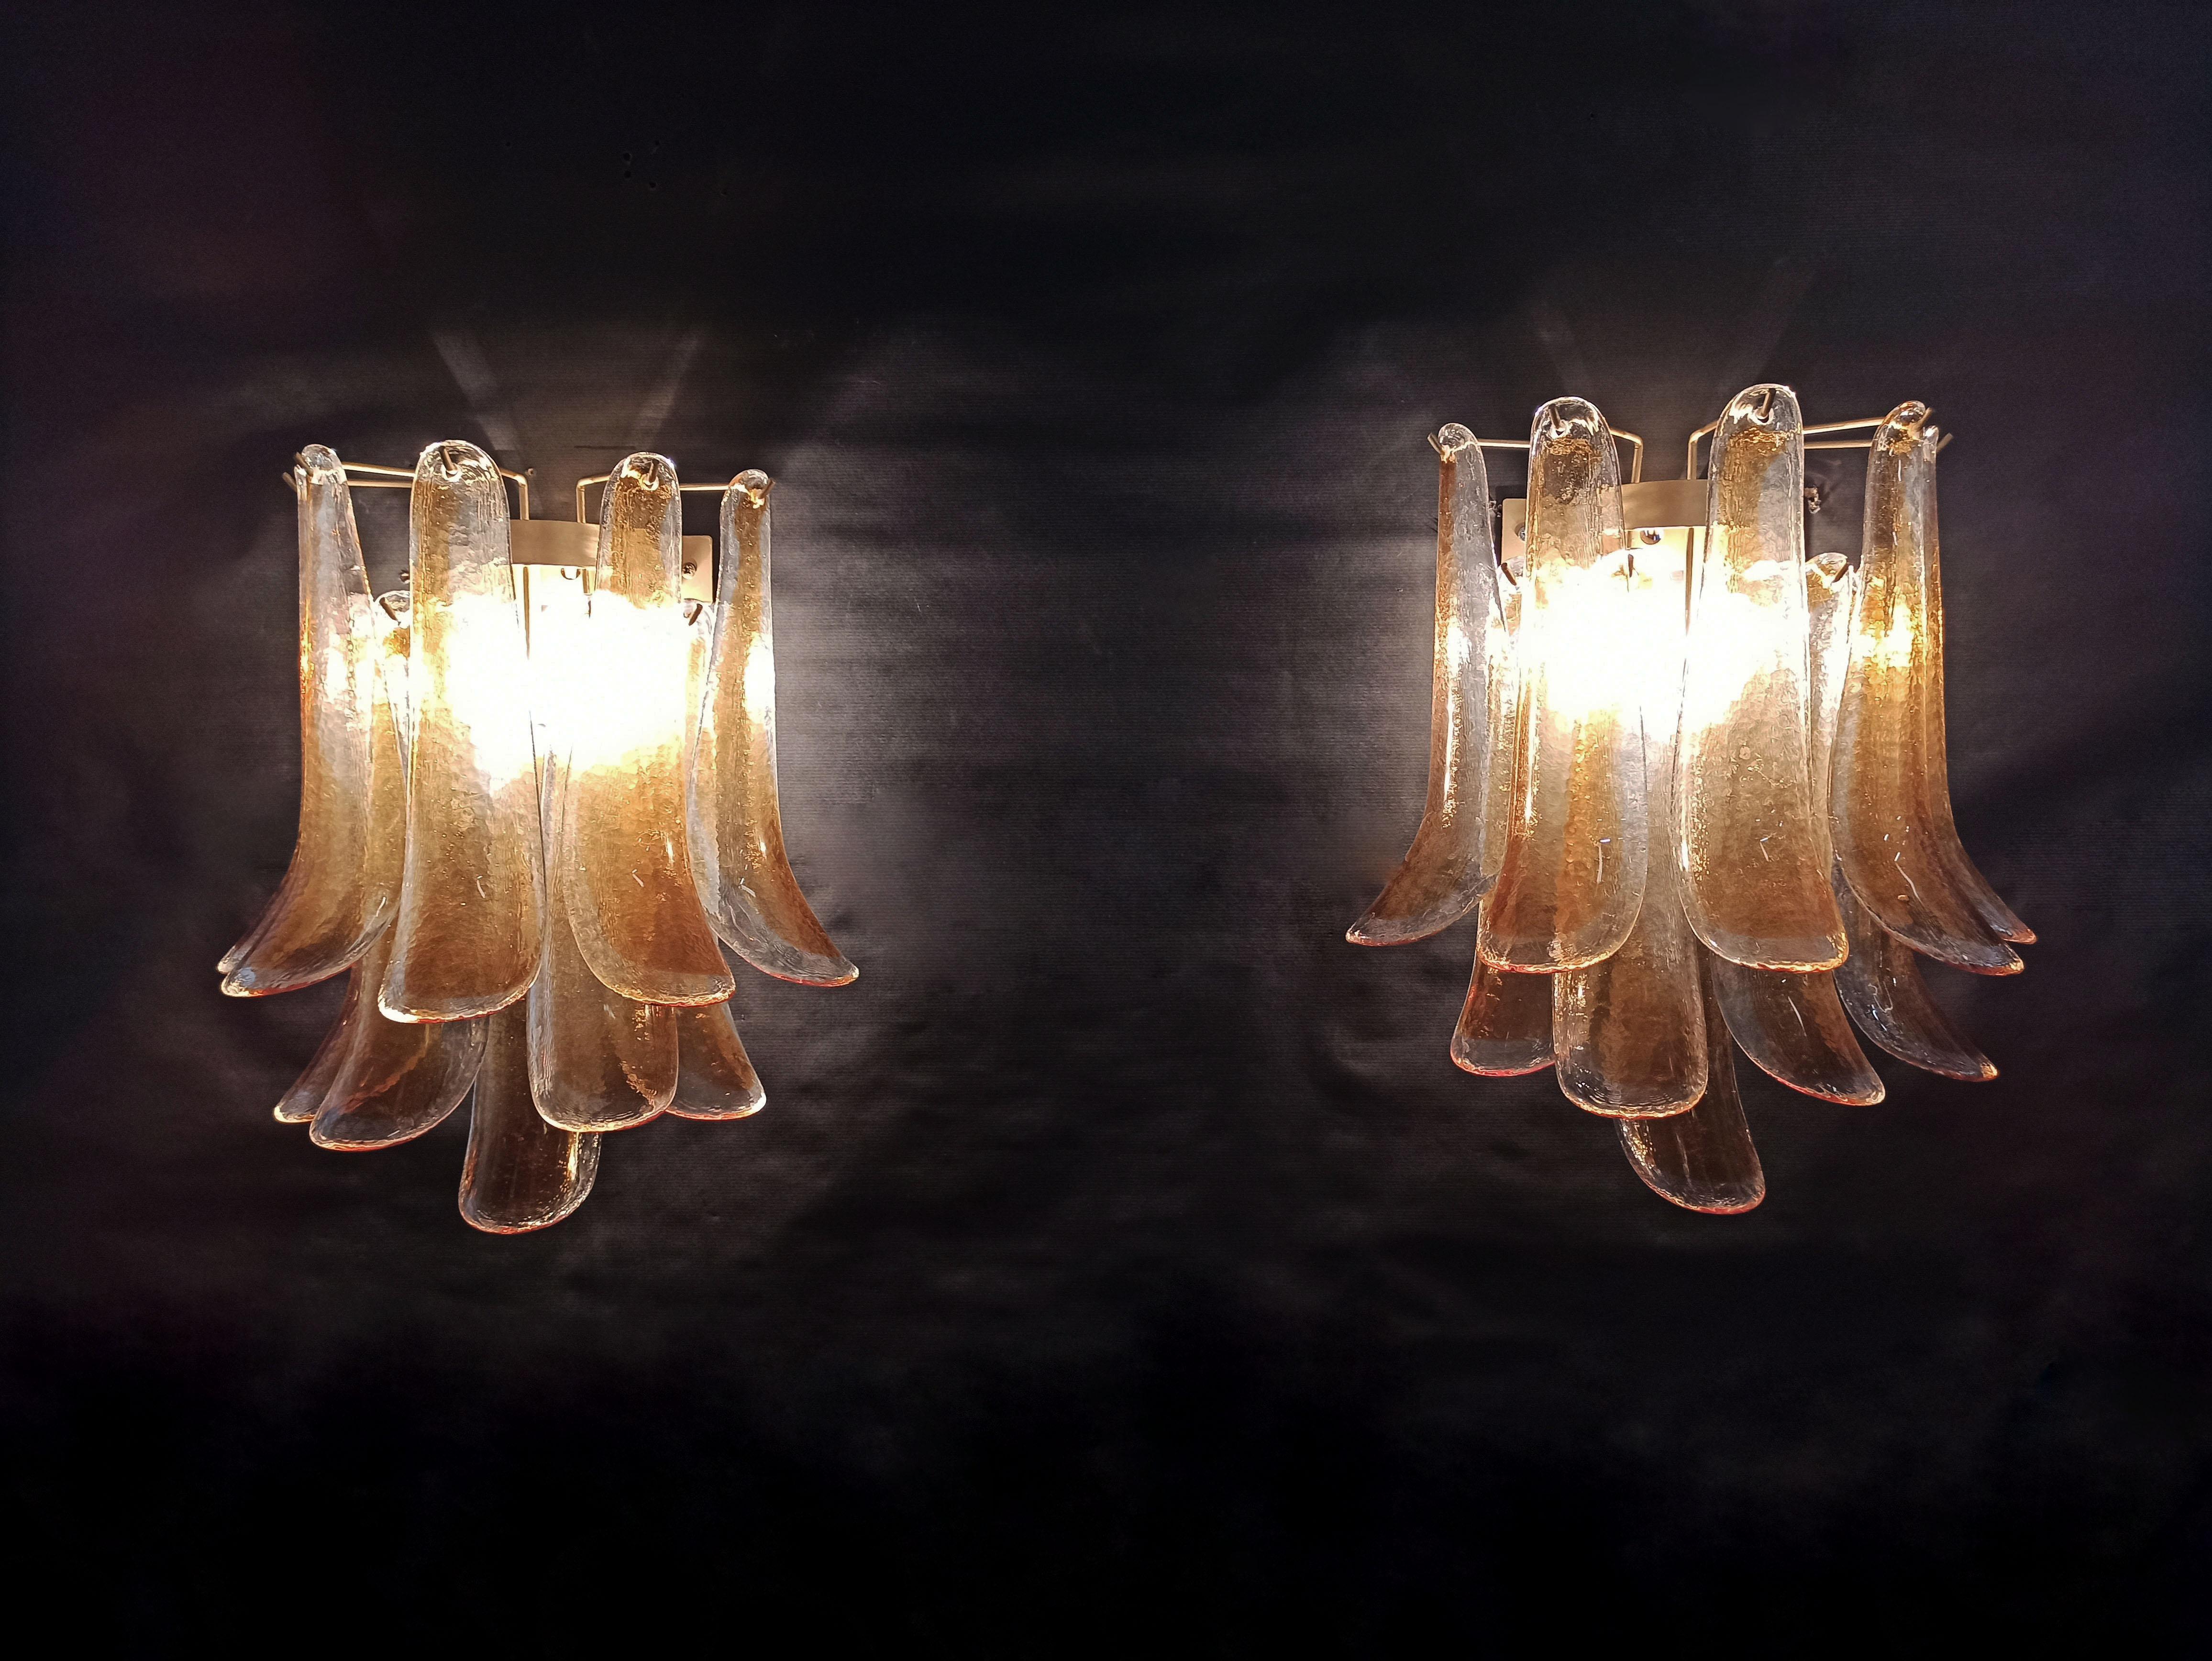 Pair of vintage Italian Murano appliques in the manner of Mazzega. Wall lights have 10 glass petals (for each applique) in a gold painted structure. The glass is transparent with an amber spot inside.
Period: late 20th century
Dimensions: 16.50